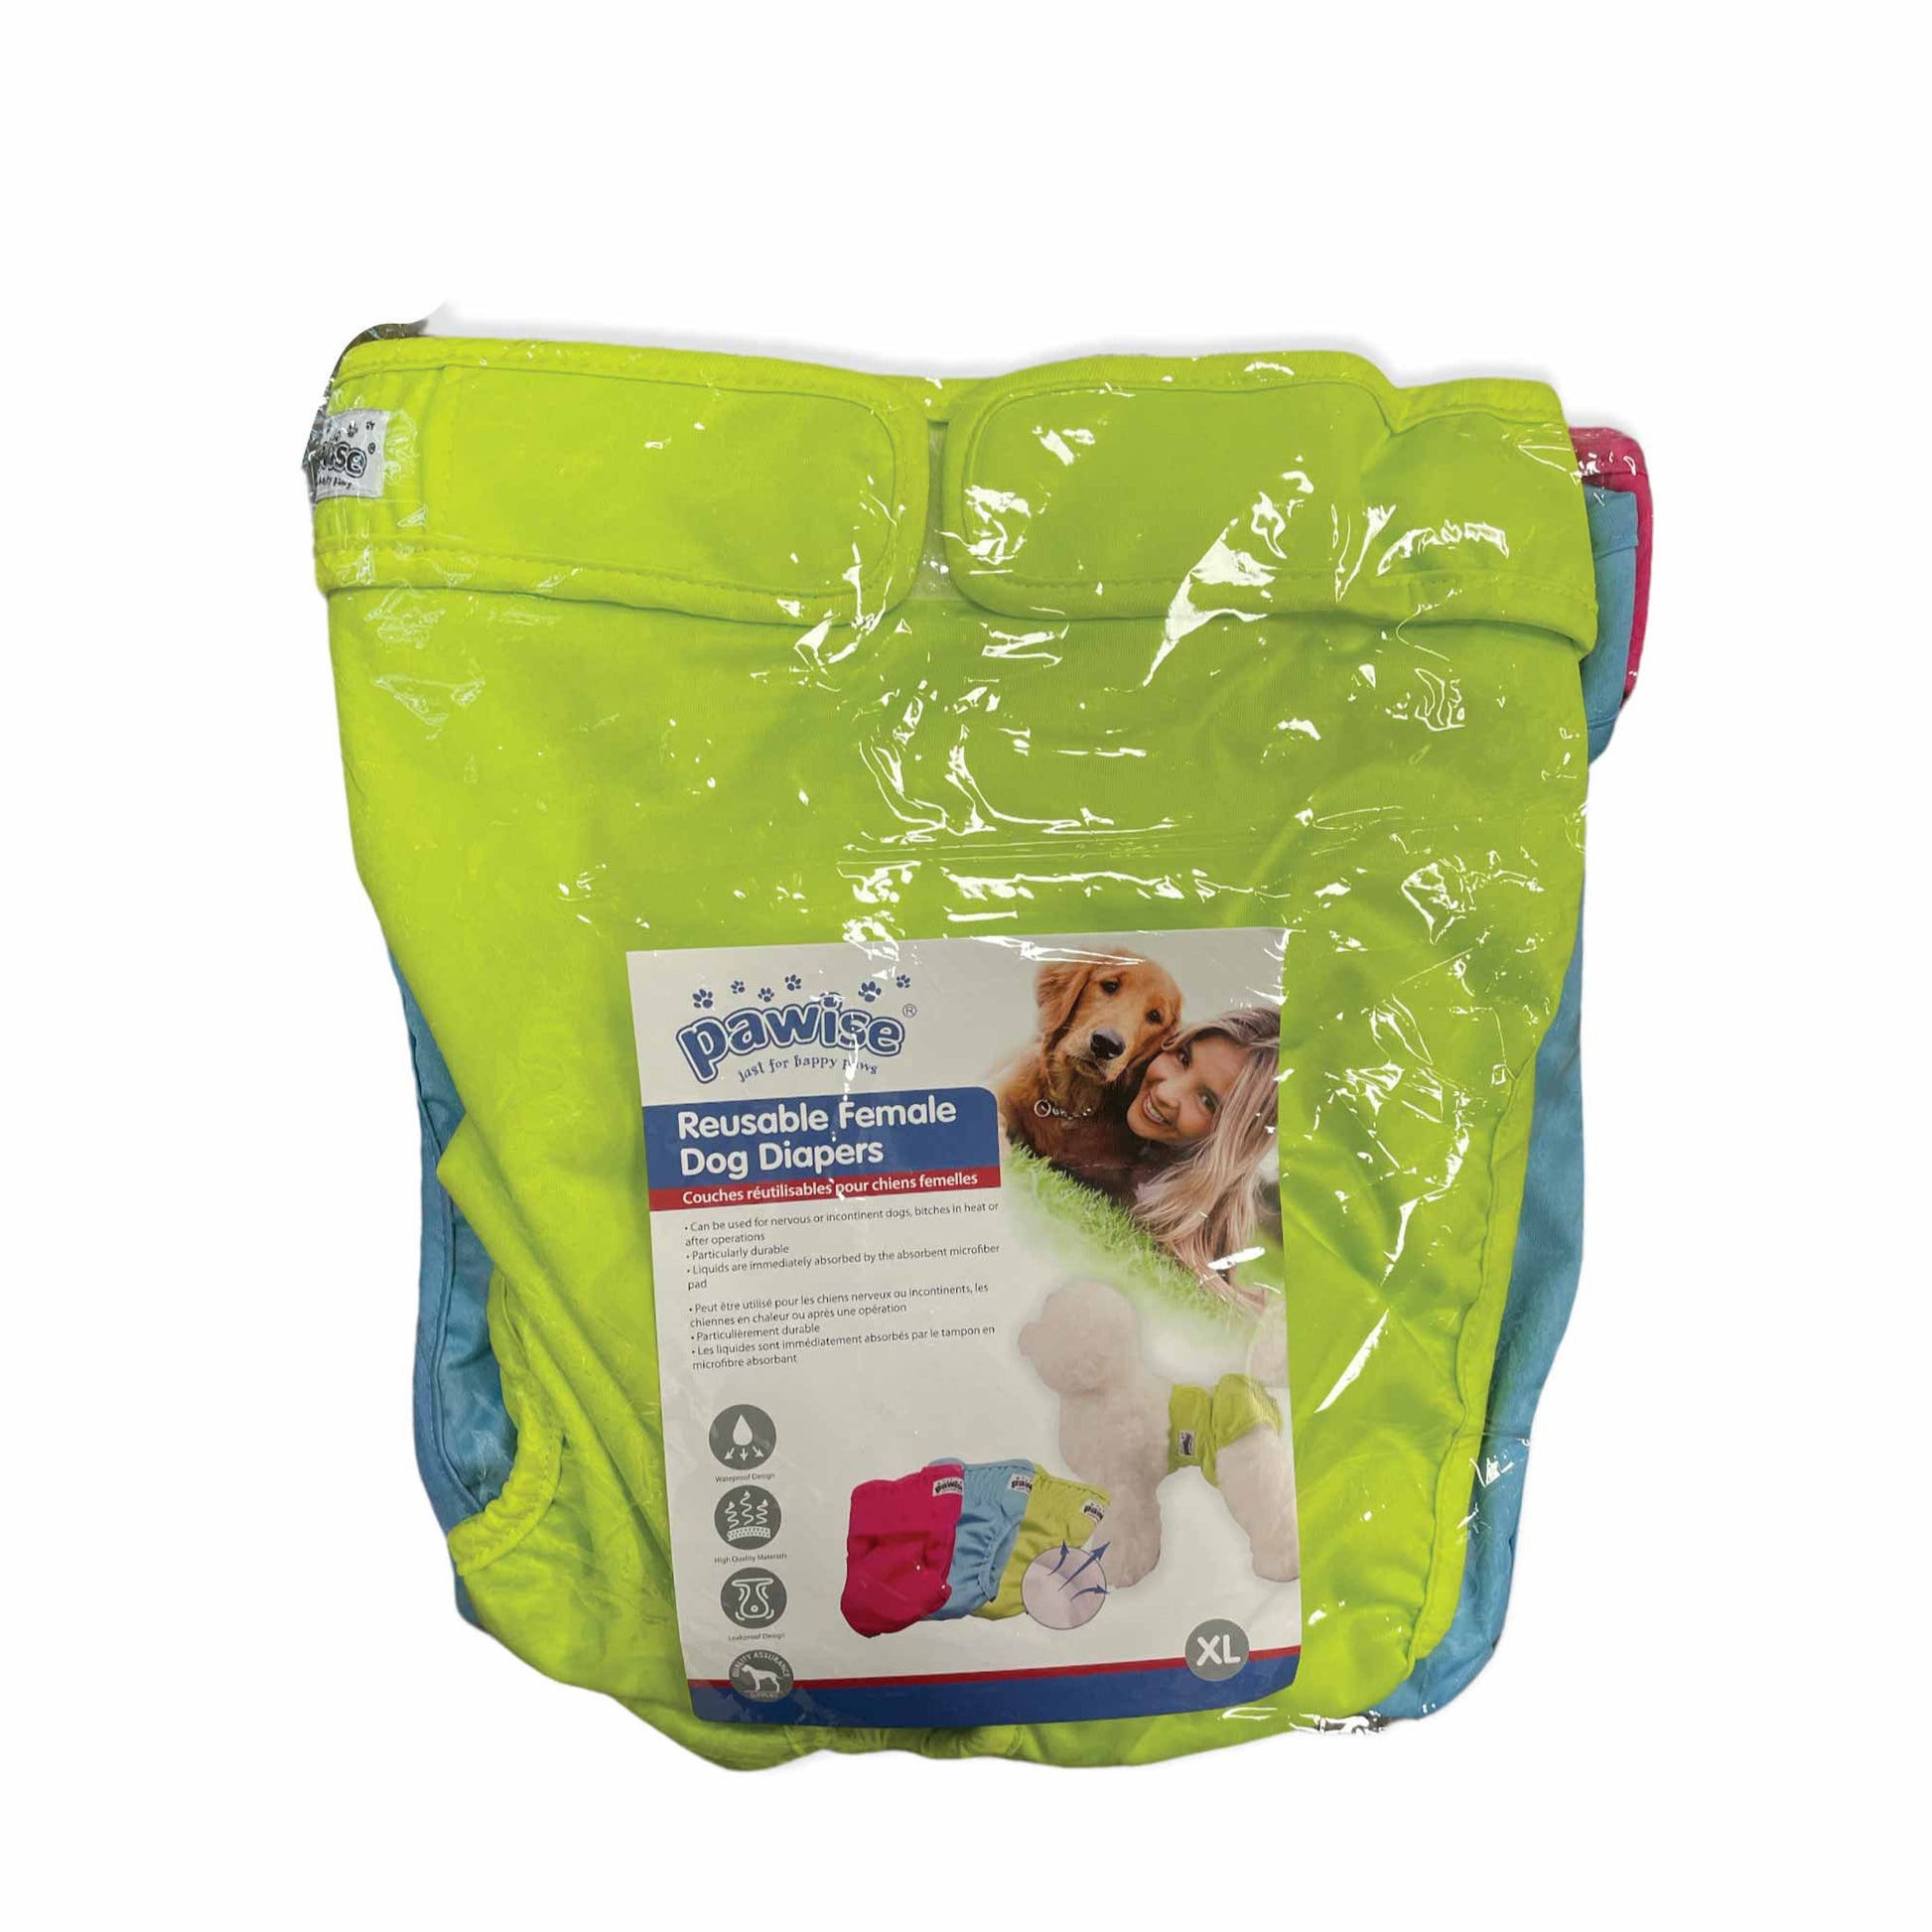 3 Pck Reusable Female Dog Diapers Puppy Nappy Eco Washable Period Incontinence Heat-14